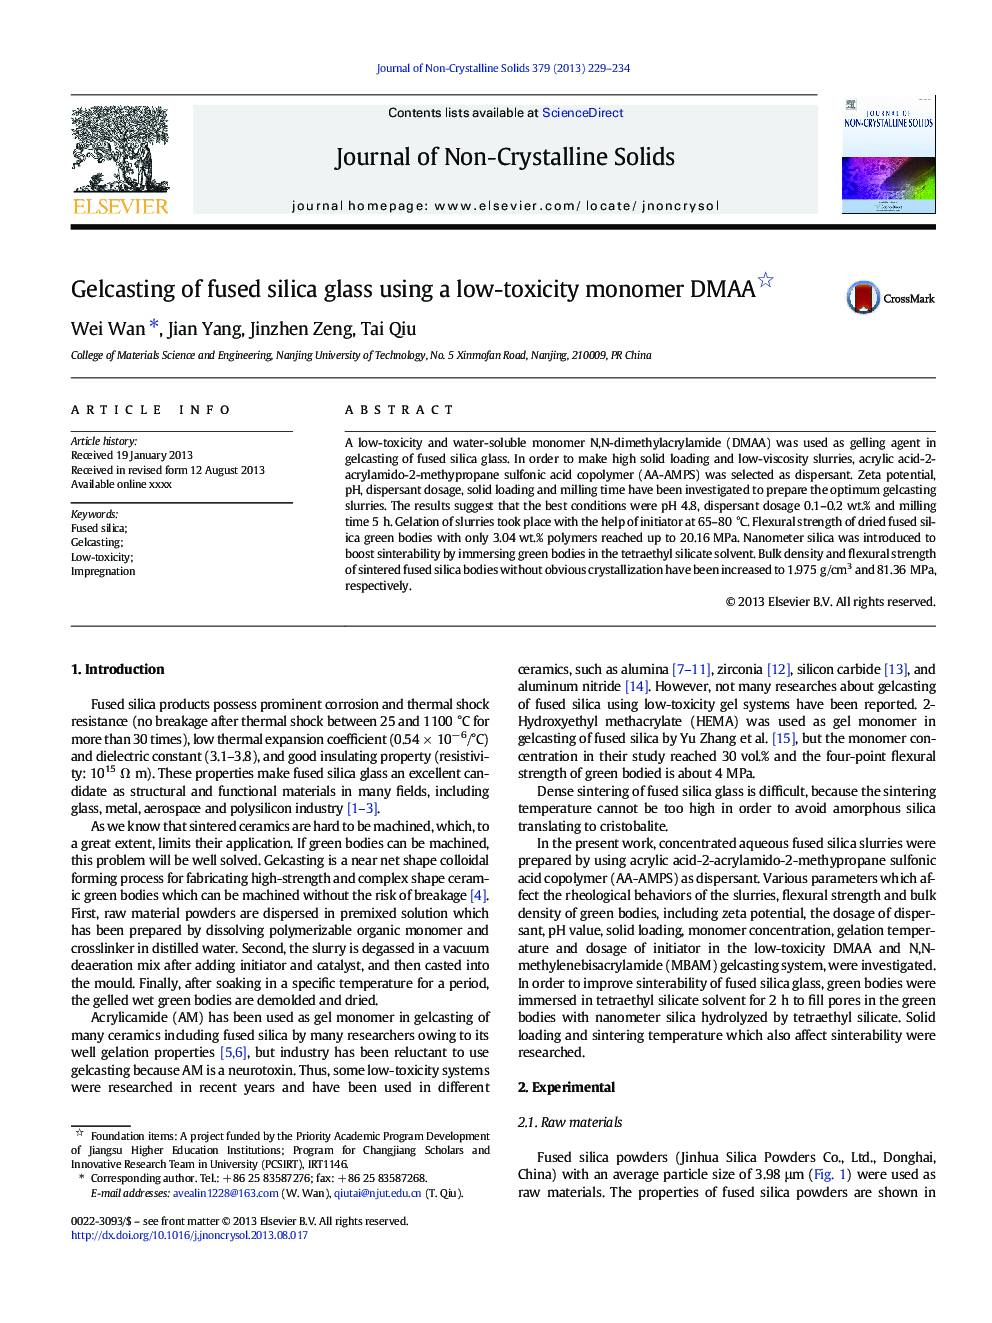 Gelcasting of fused silica glass using a low-toxicity monomer DMAA